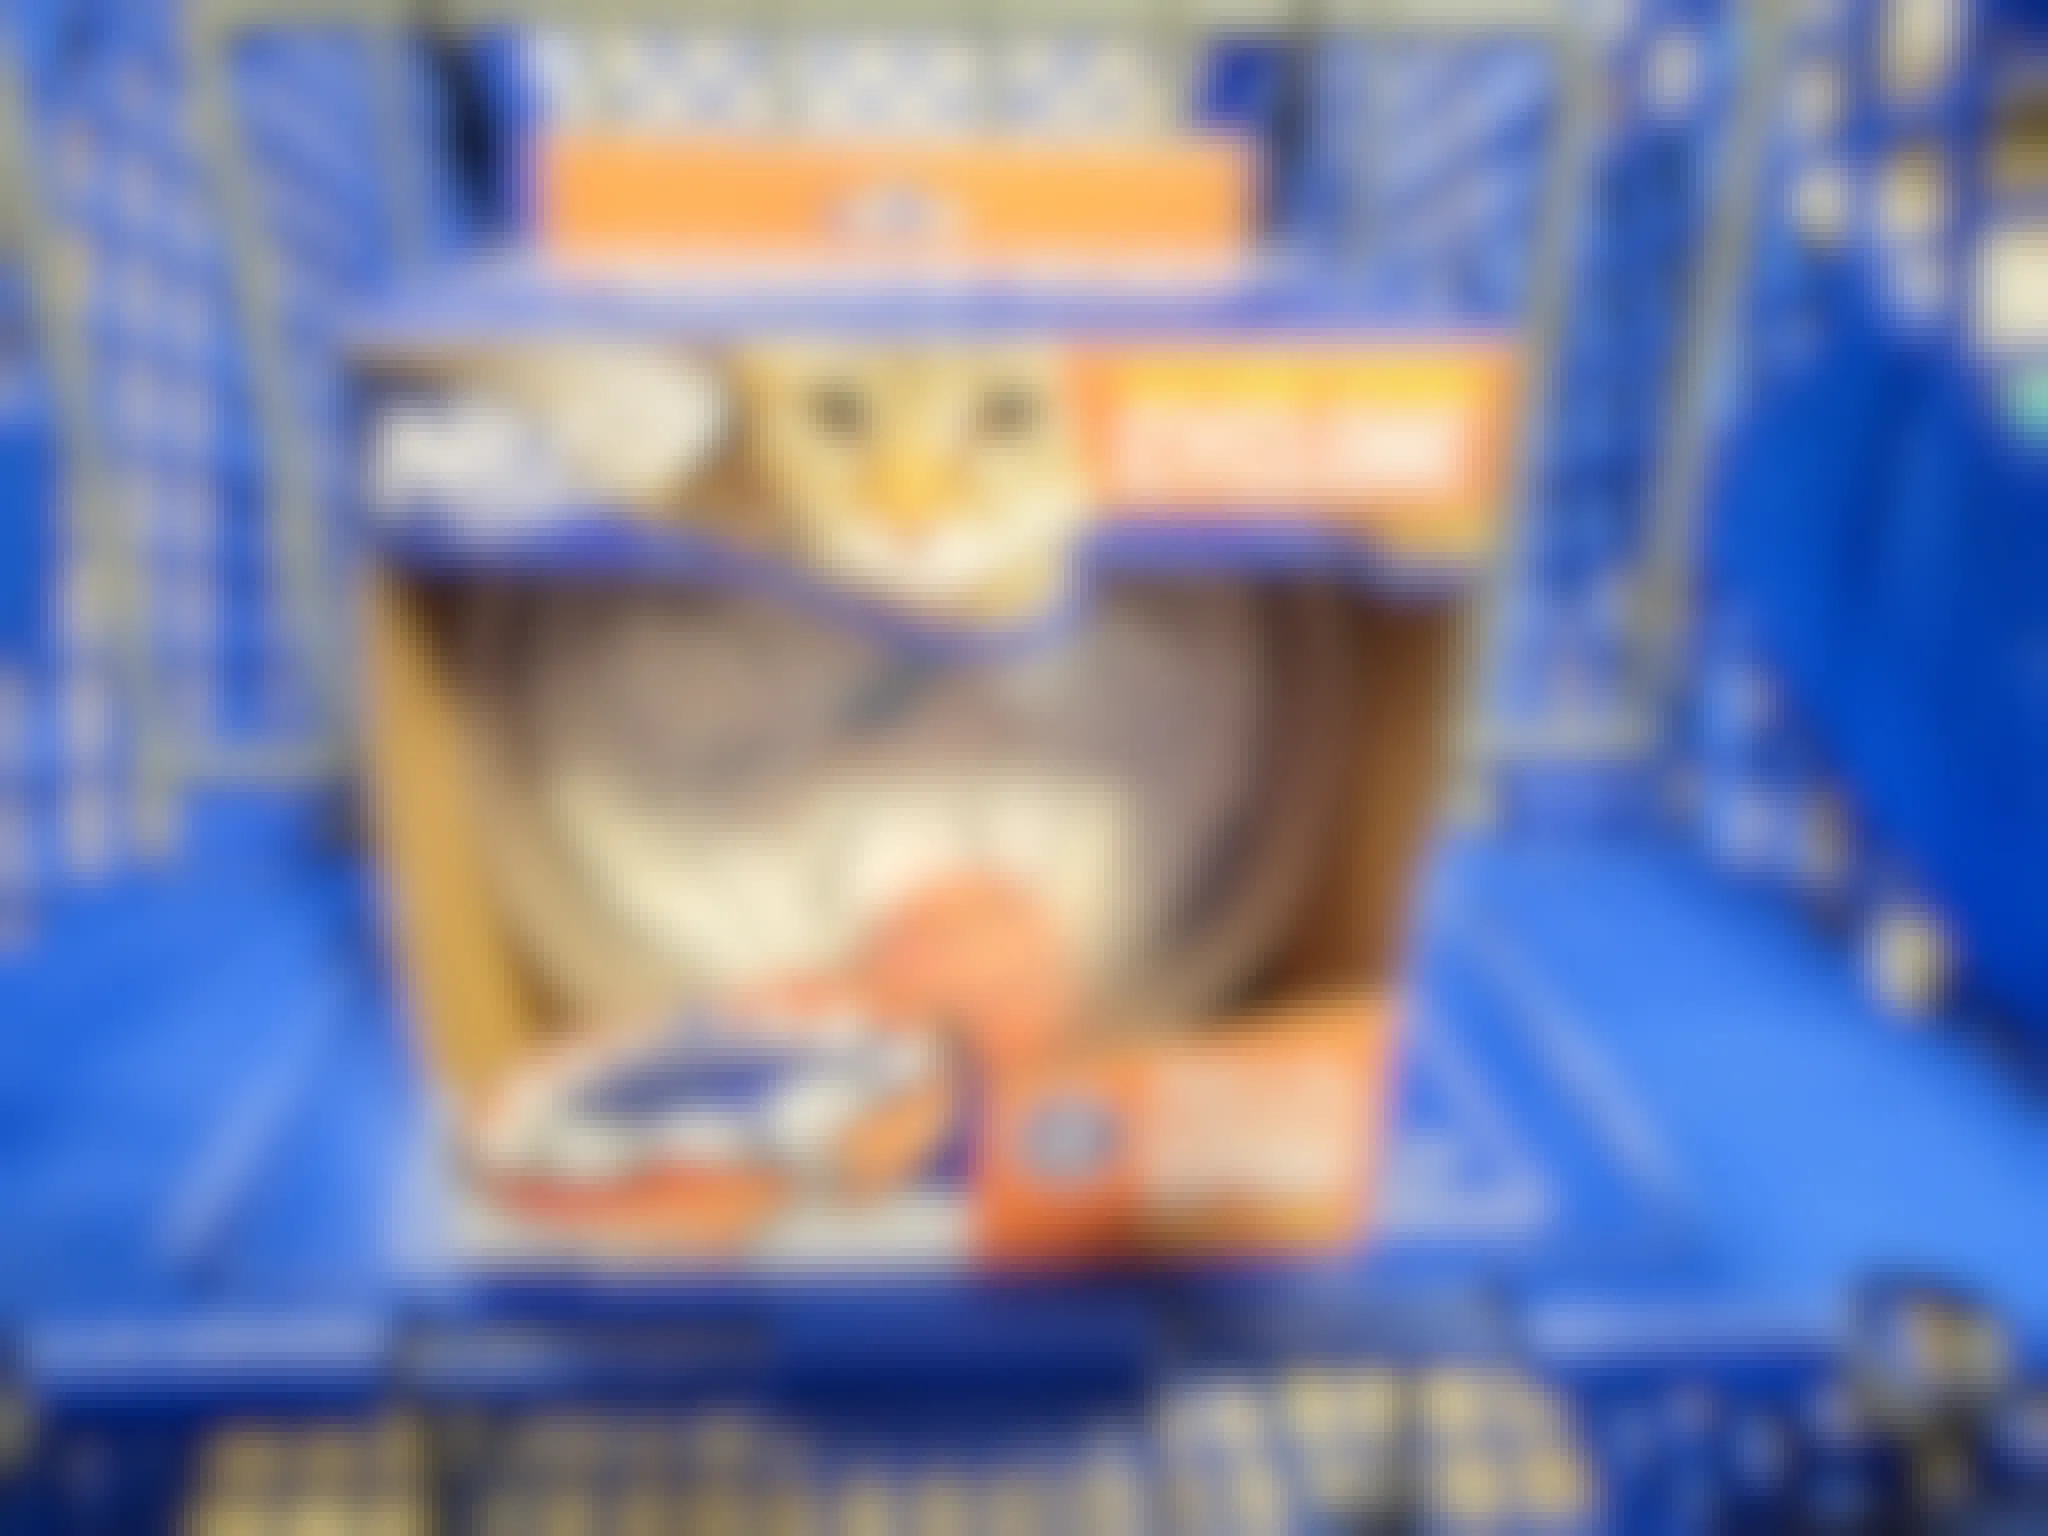 nerf cat toy in a cart